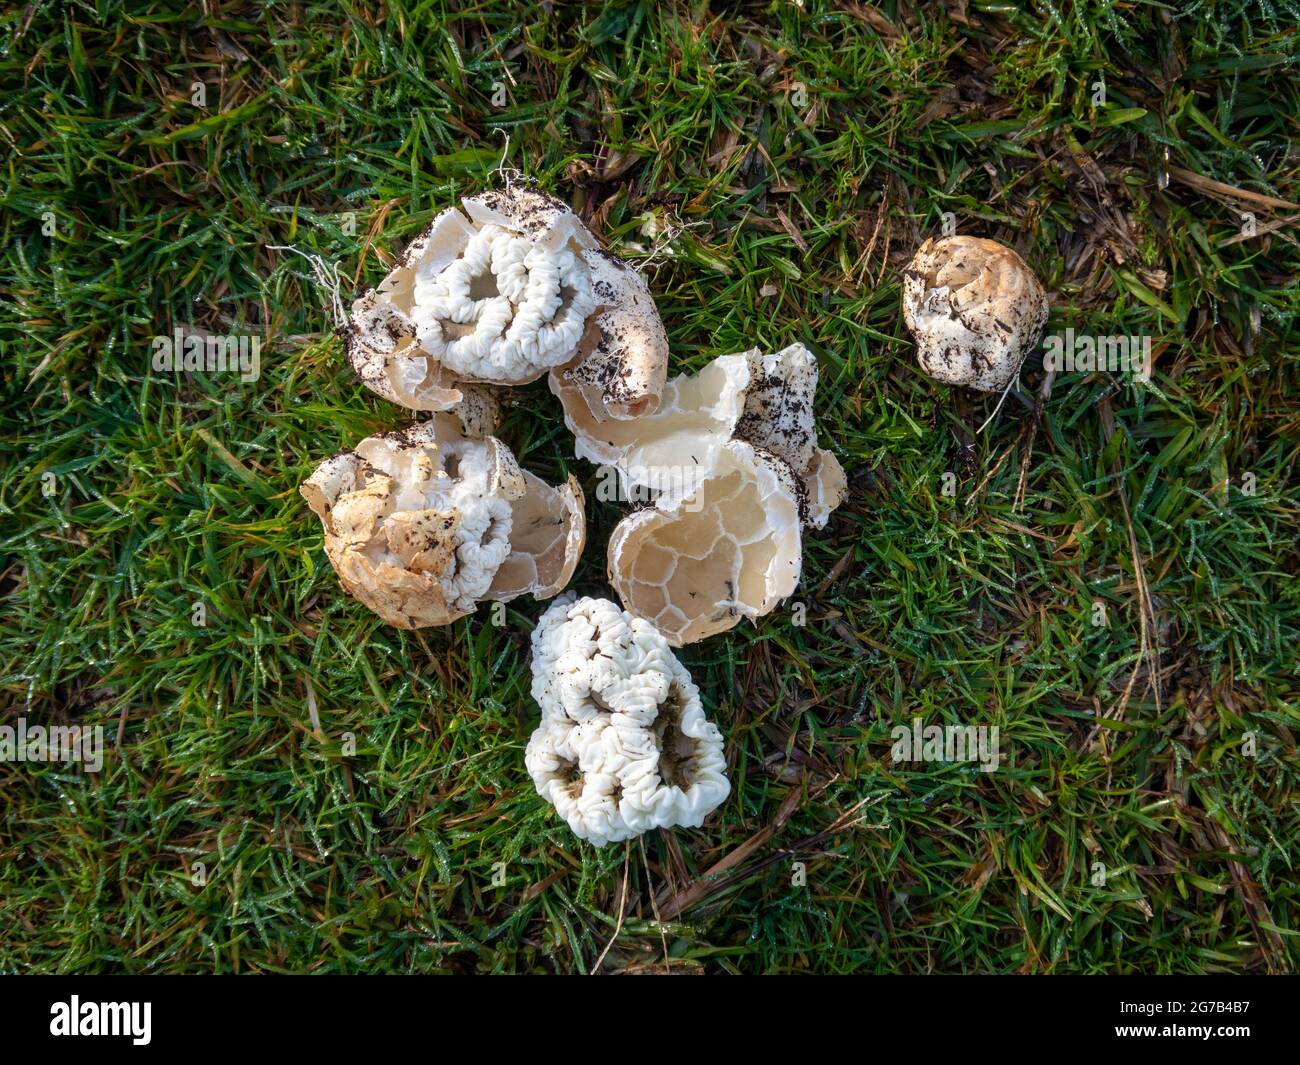 Ileodictyon cibarium, Basket Fungus, that look like puff balls, picked and laid on the grass then broken open to examine the latticed walls all folded Stock Photo